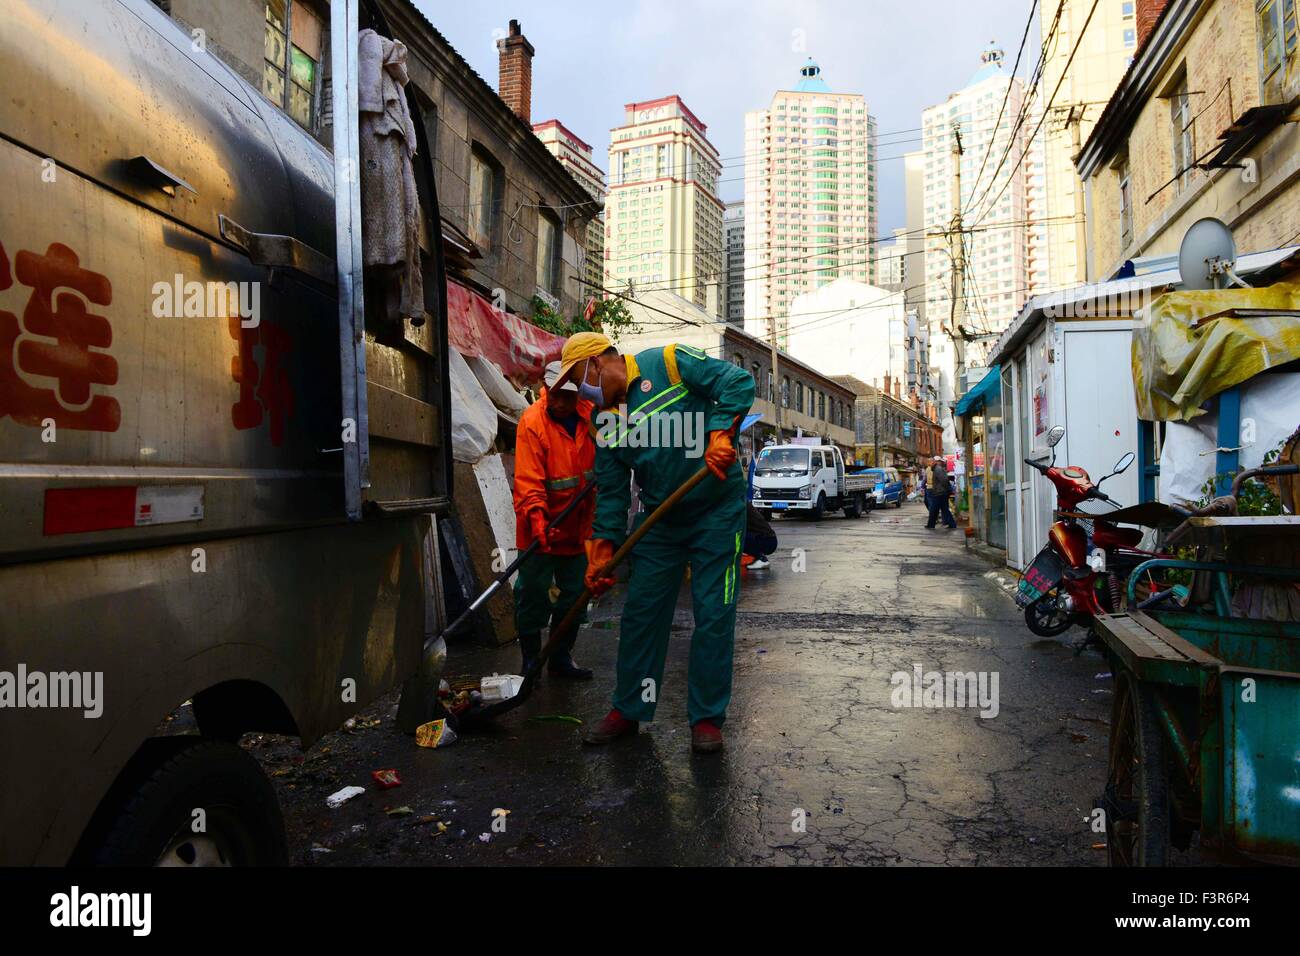 Dalian, China's Liaoning Province. 11th Oct, 2015. Sanitation men work at Dongguan Street in Dalian City, northeast China's Liaoning Province, Oct. 11, 2015. Dongguan Street, a neighborhood with about 100 years history, is scheduled to be reconstructed in 2015, according to the local municipal planning. Credit:  Pu Feng/Xinhua/Alamy Live News Stock Photo